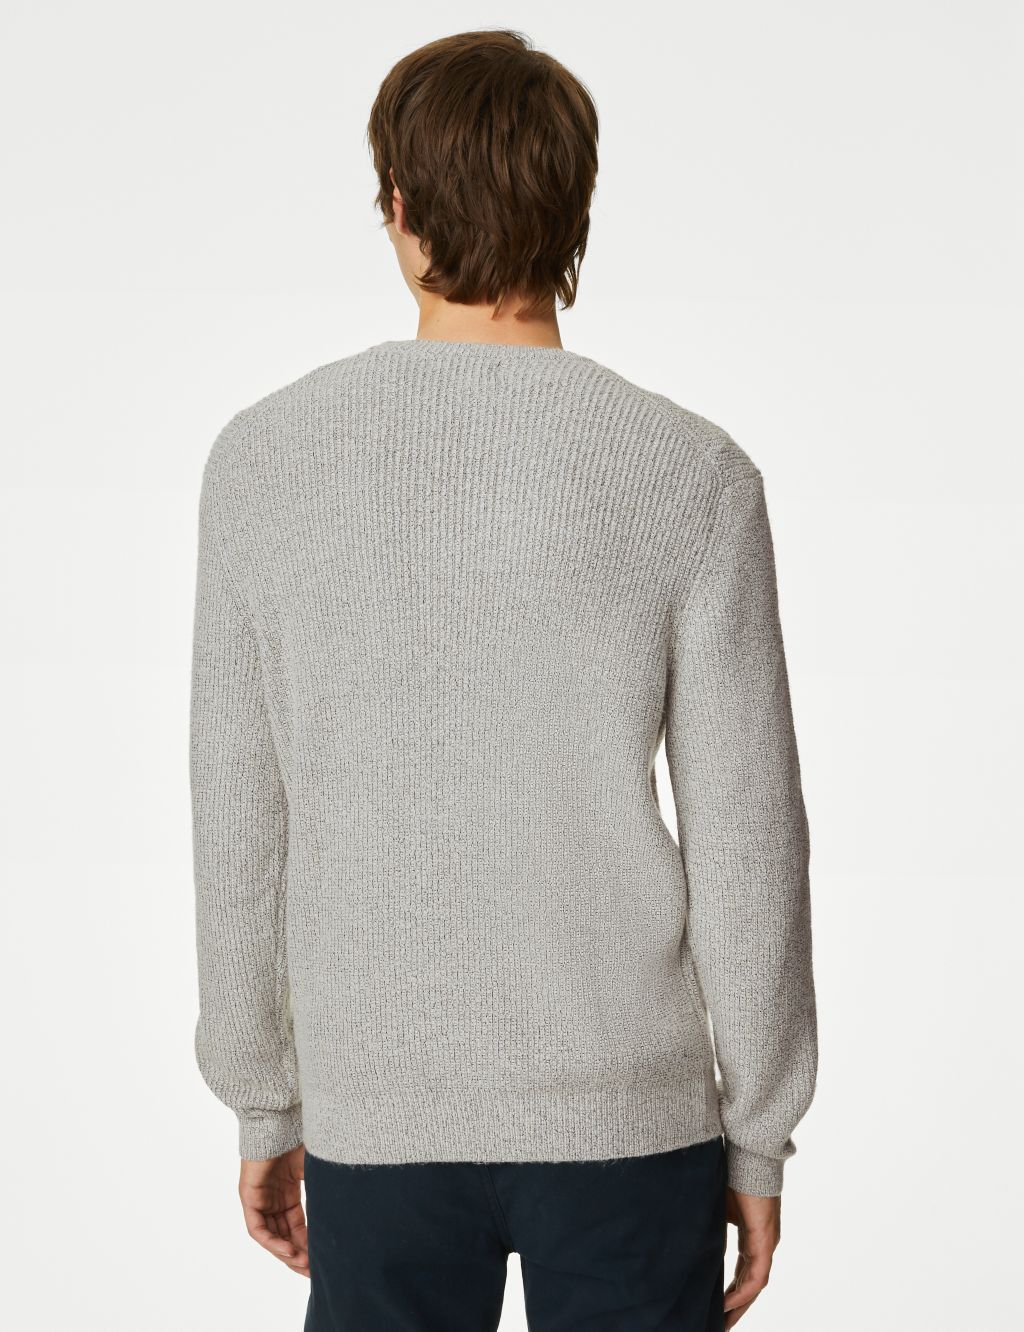 Supersoft Chunky Crew Neck Jumper image 5